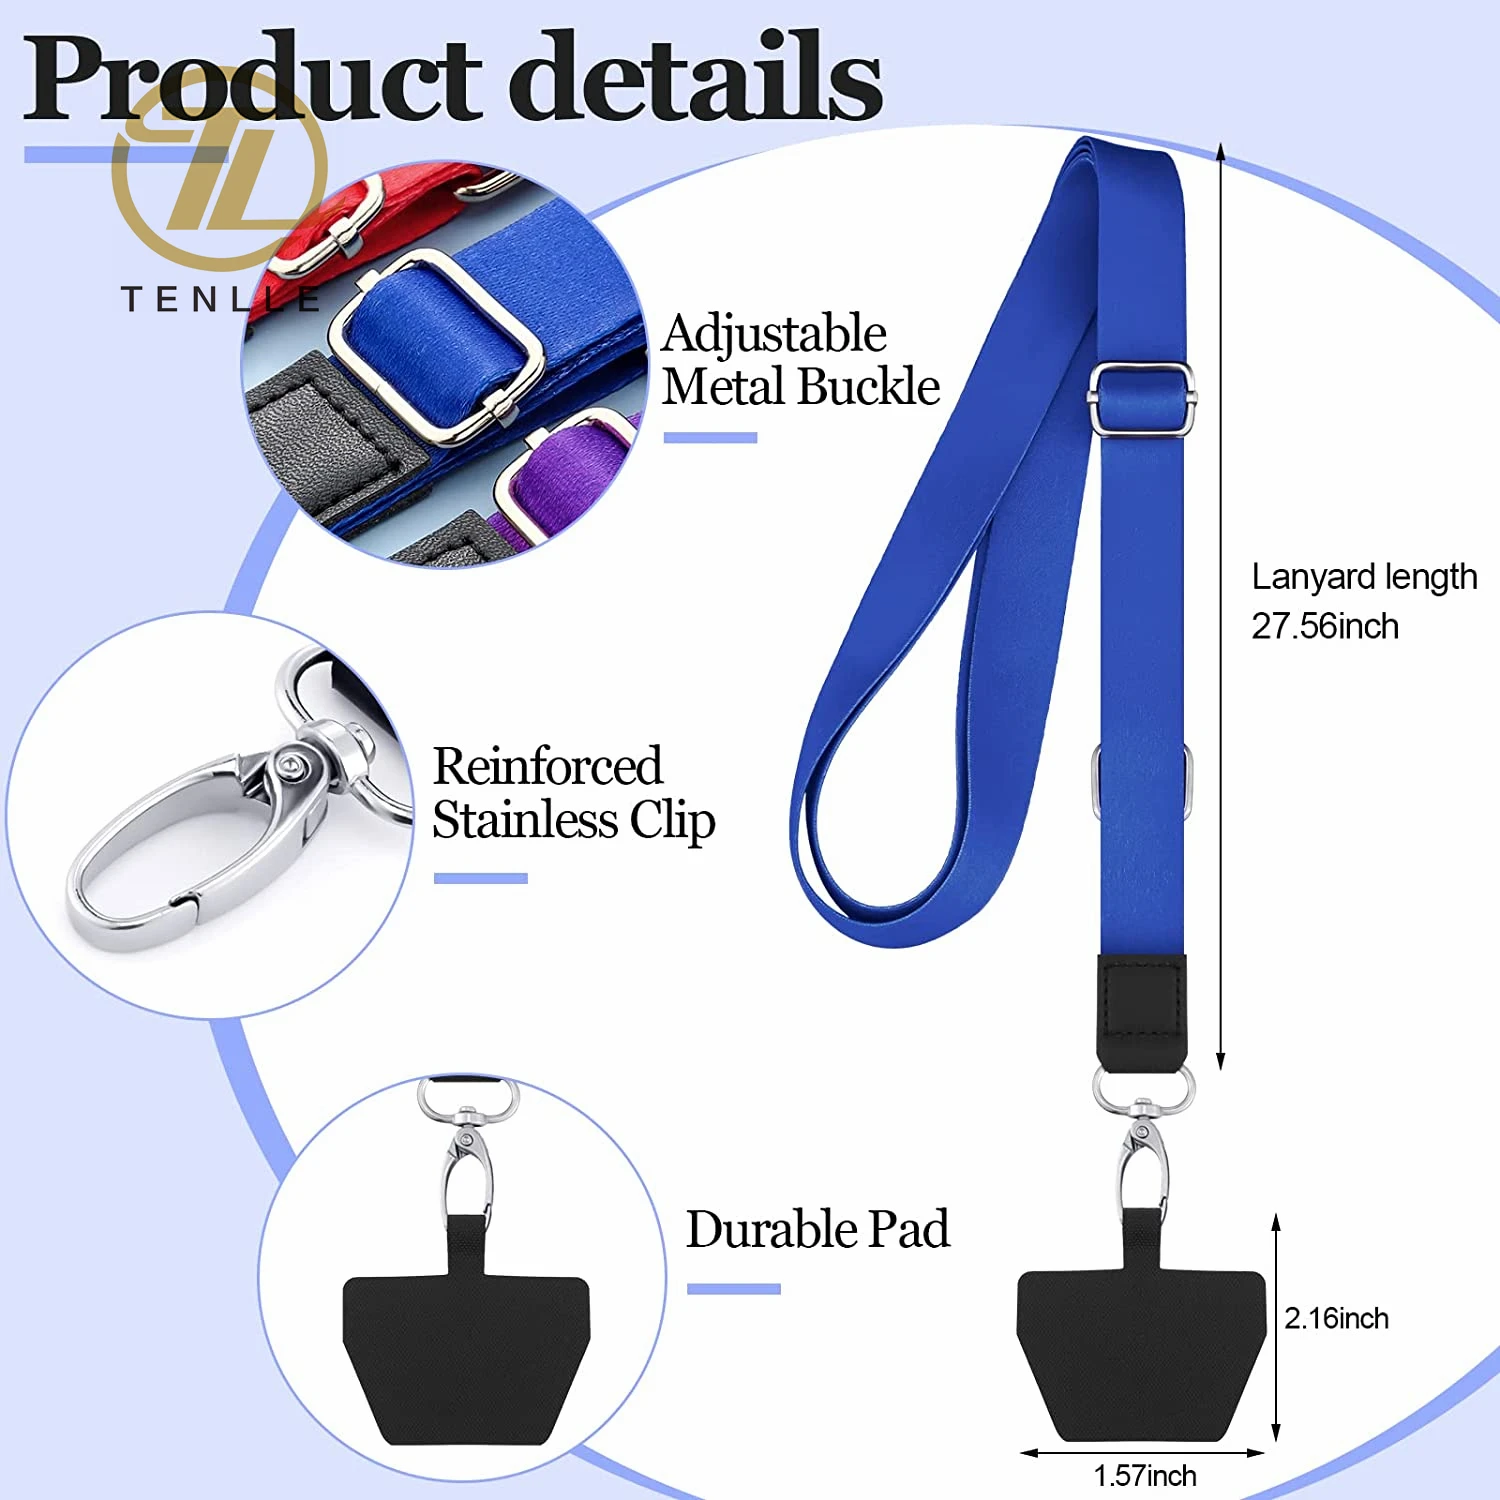 Universal Cell Phone Lanyards With Leather Adjustable Neck Strap Nylon Crossbody Lanyard For Phone Case Keys ID With Phone